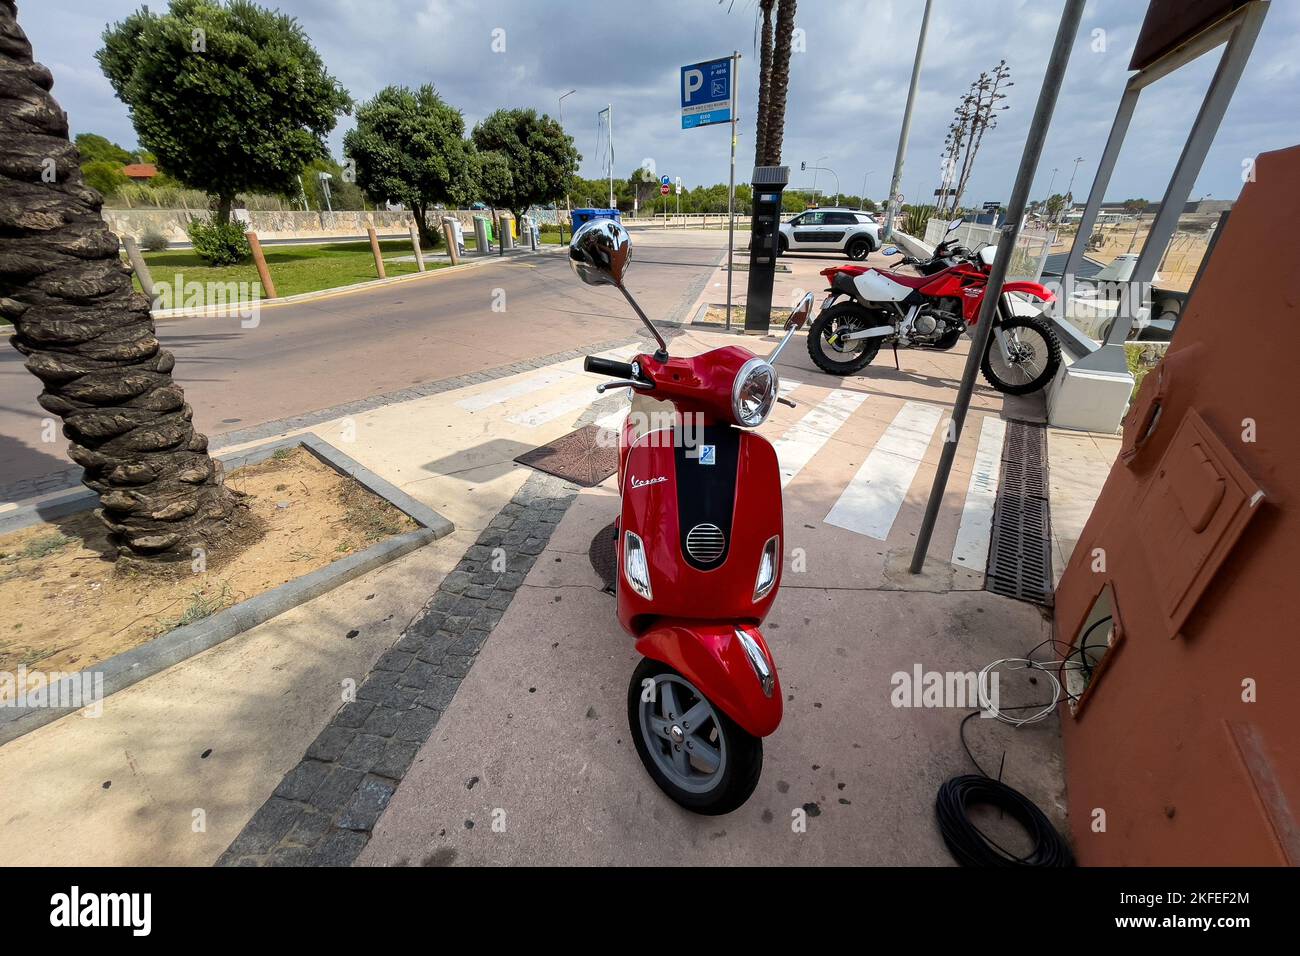 Red Vespa scooter parked on the street Stock Photo